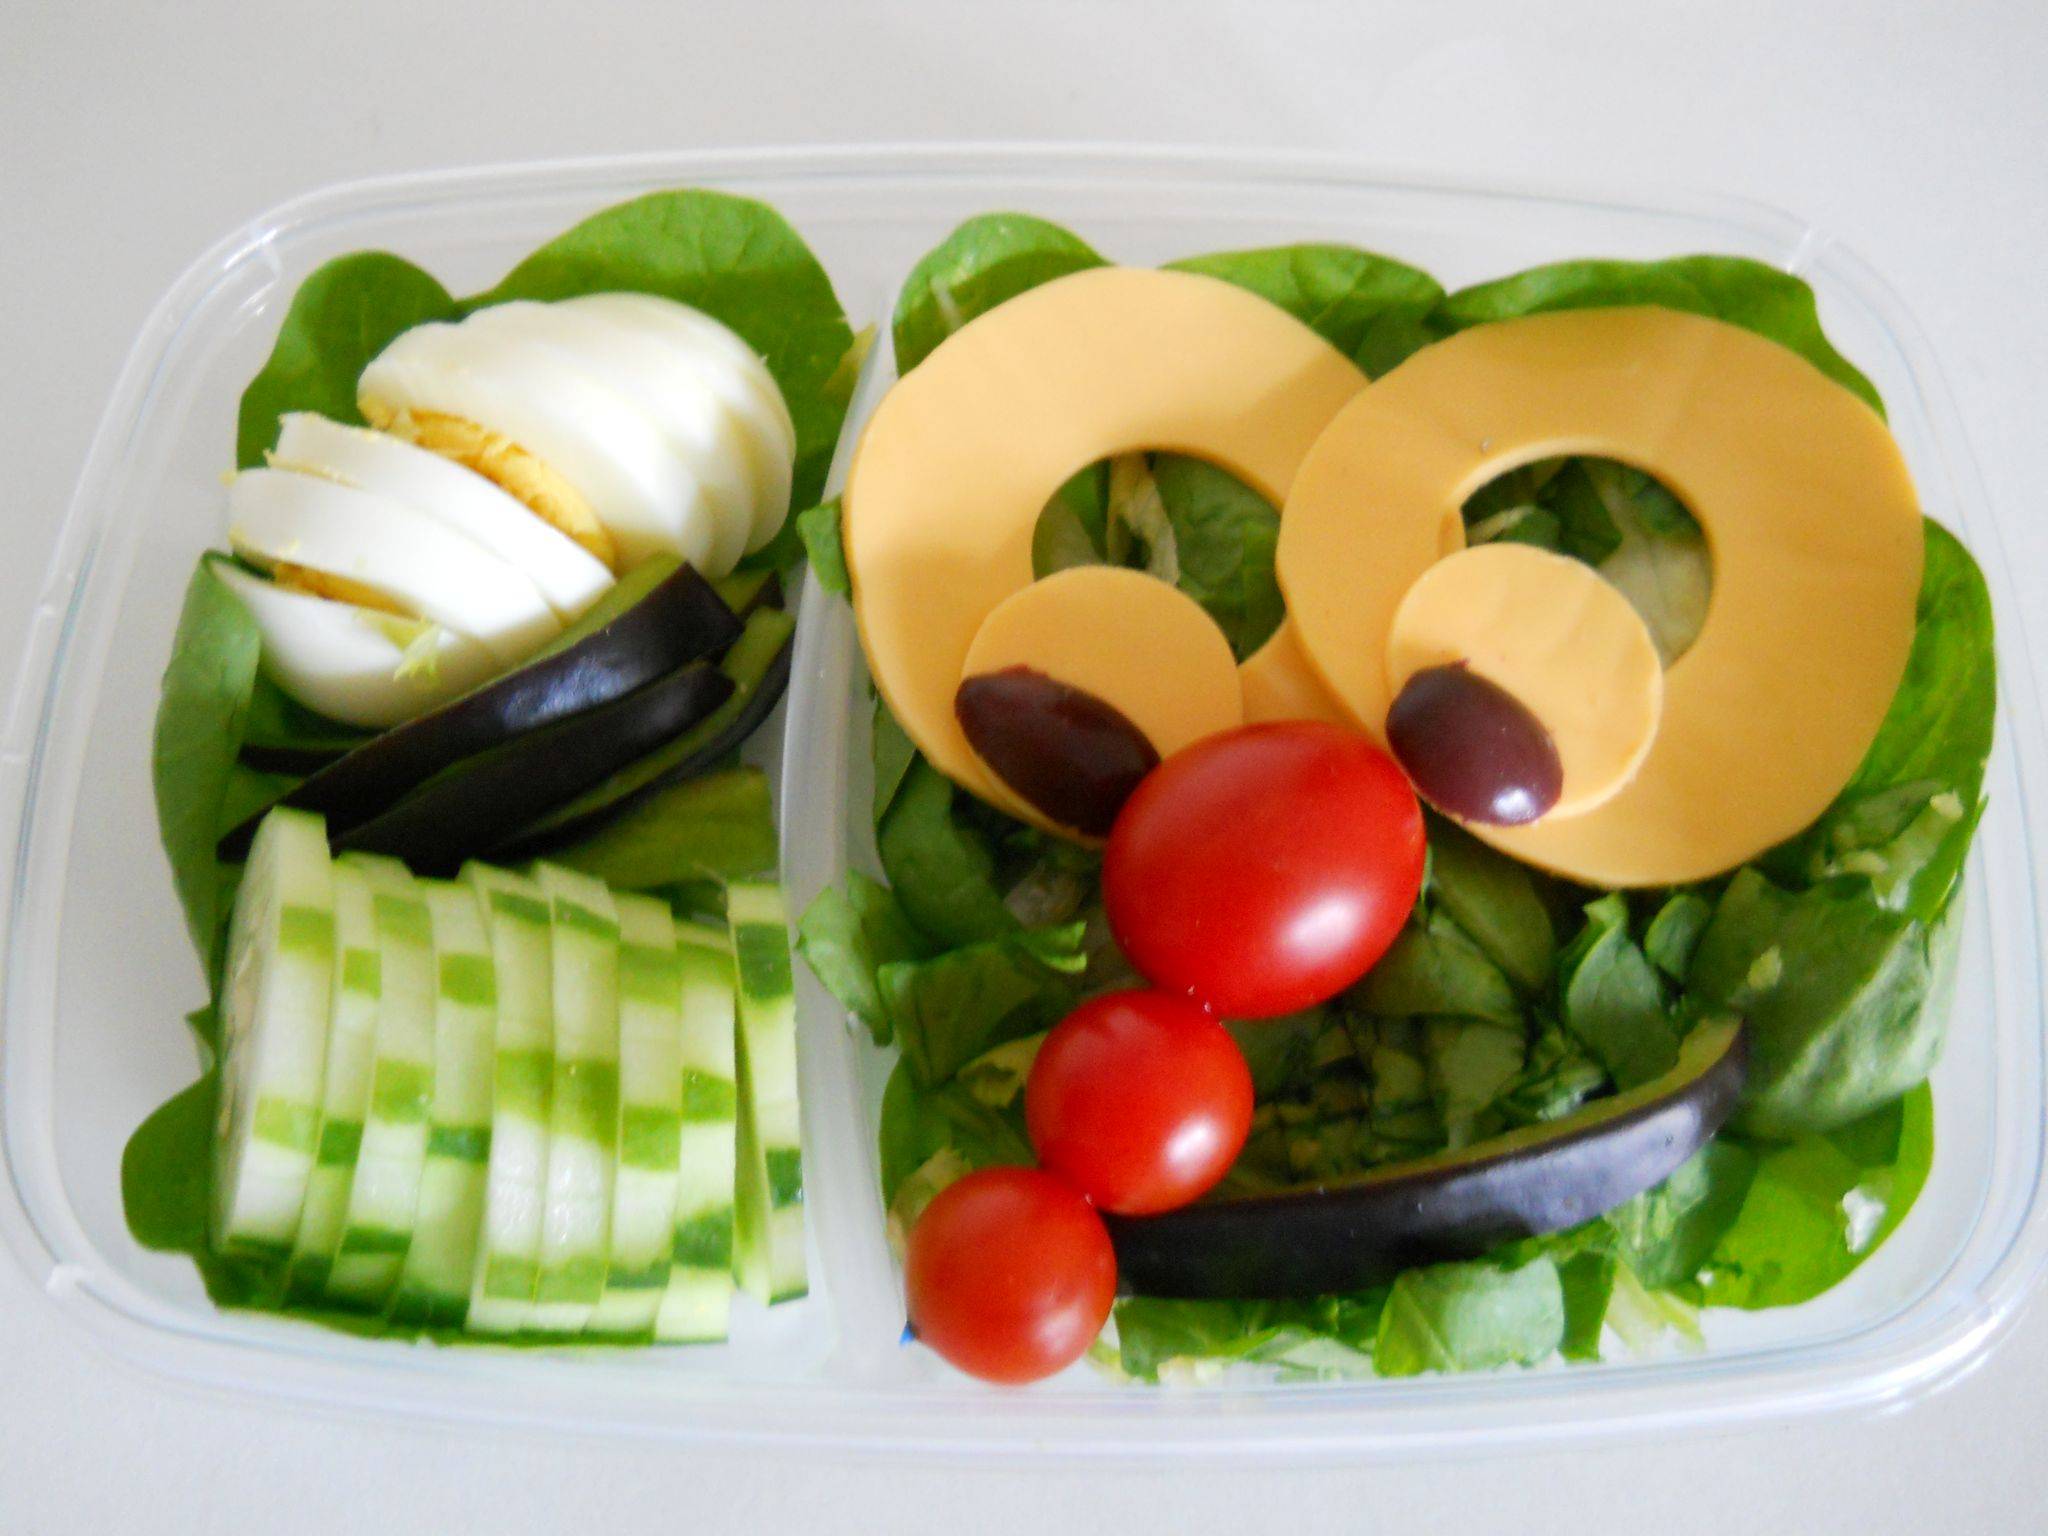 Back to School Bento Boxes: An attempt at a Japanese boxed lunch